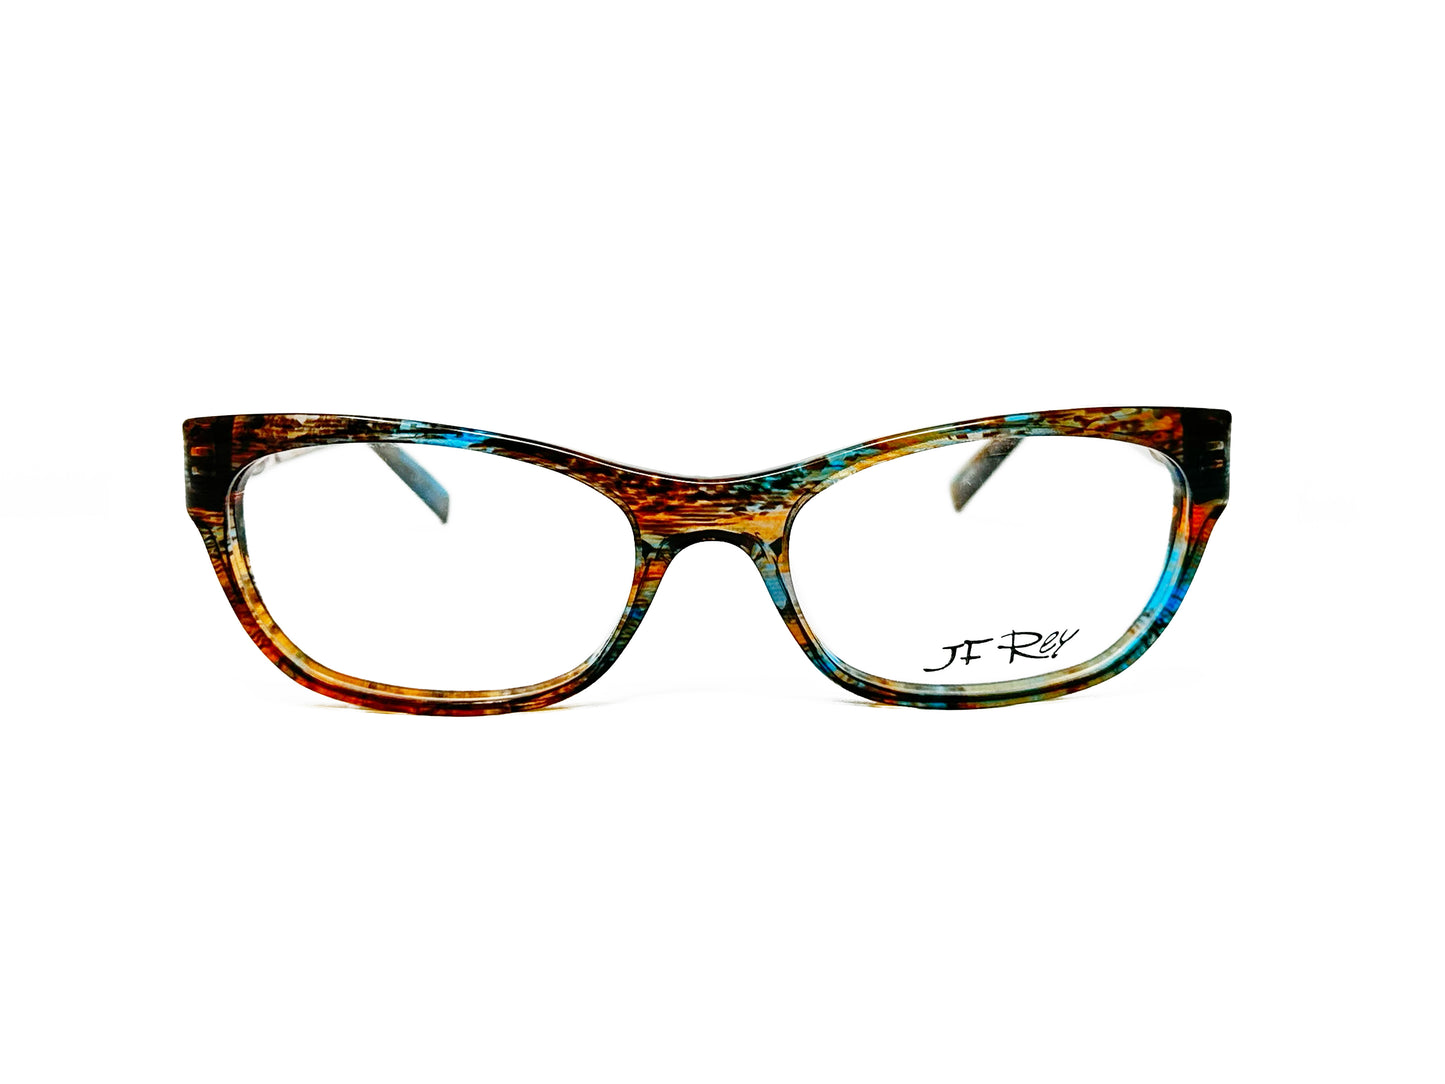 JF Rey rectangular acetate optical frame with upward lift. Model: JF1311. Color: 9020 - Brown and turquoise pattern. Front view. 